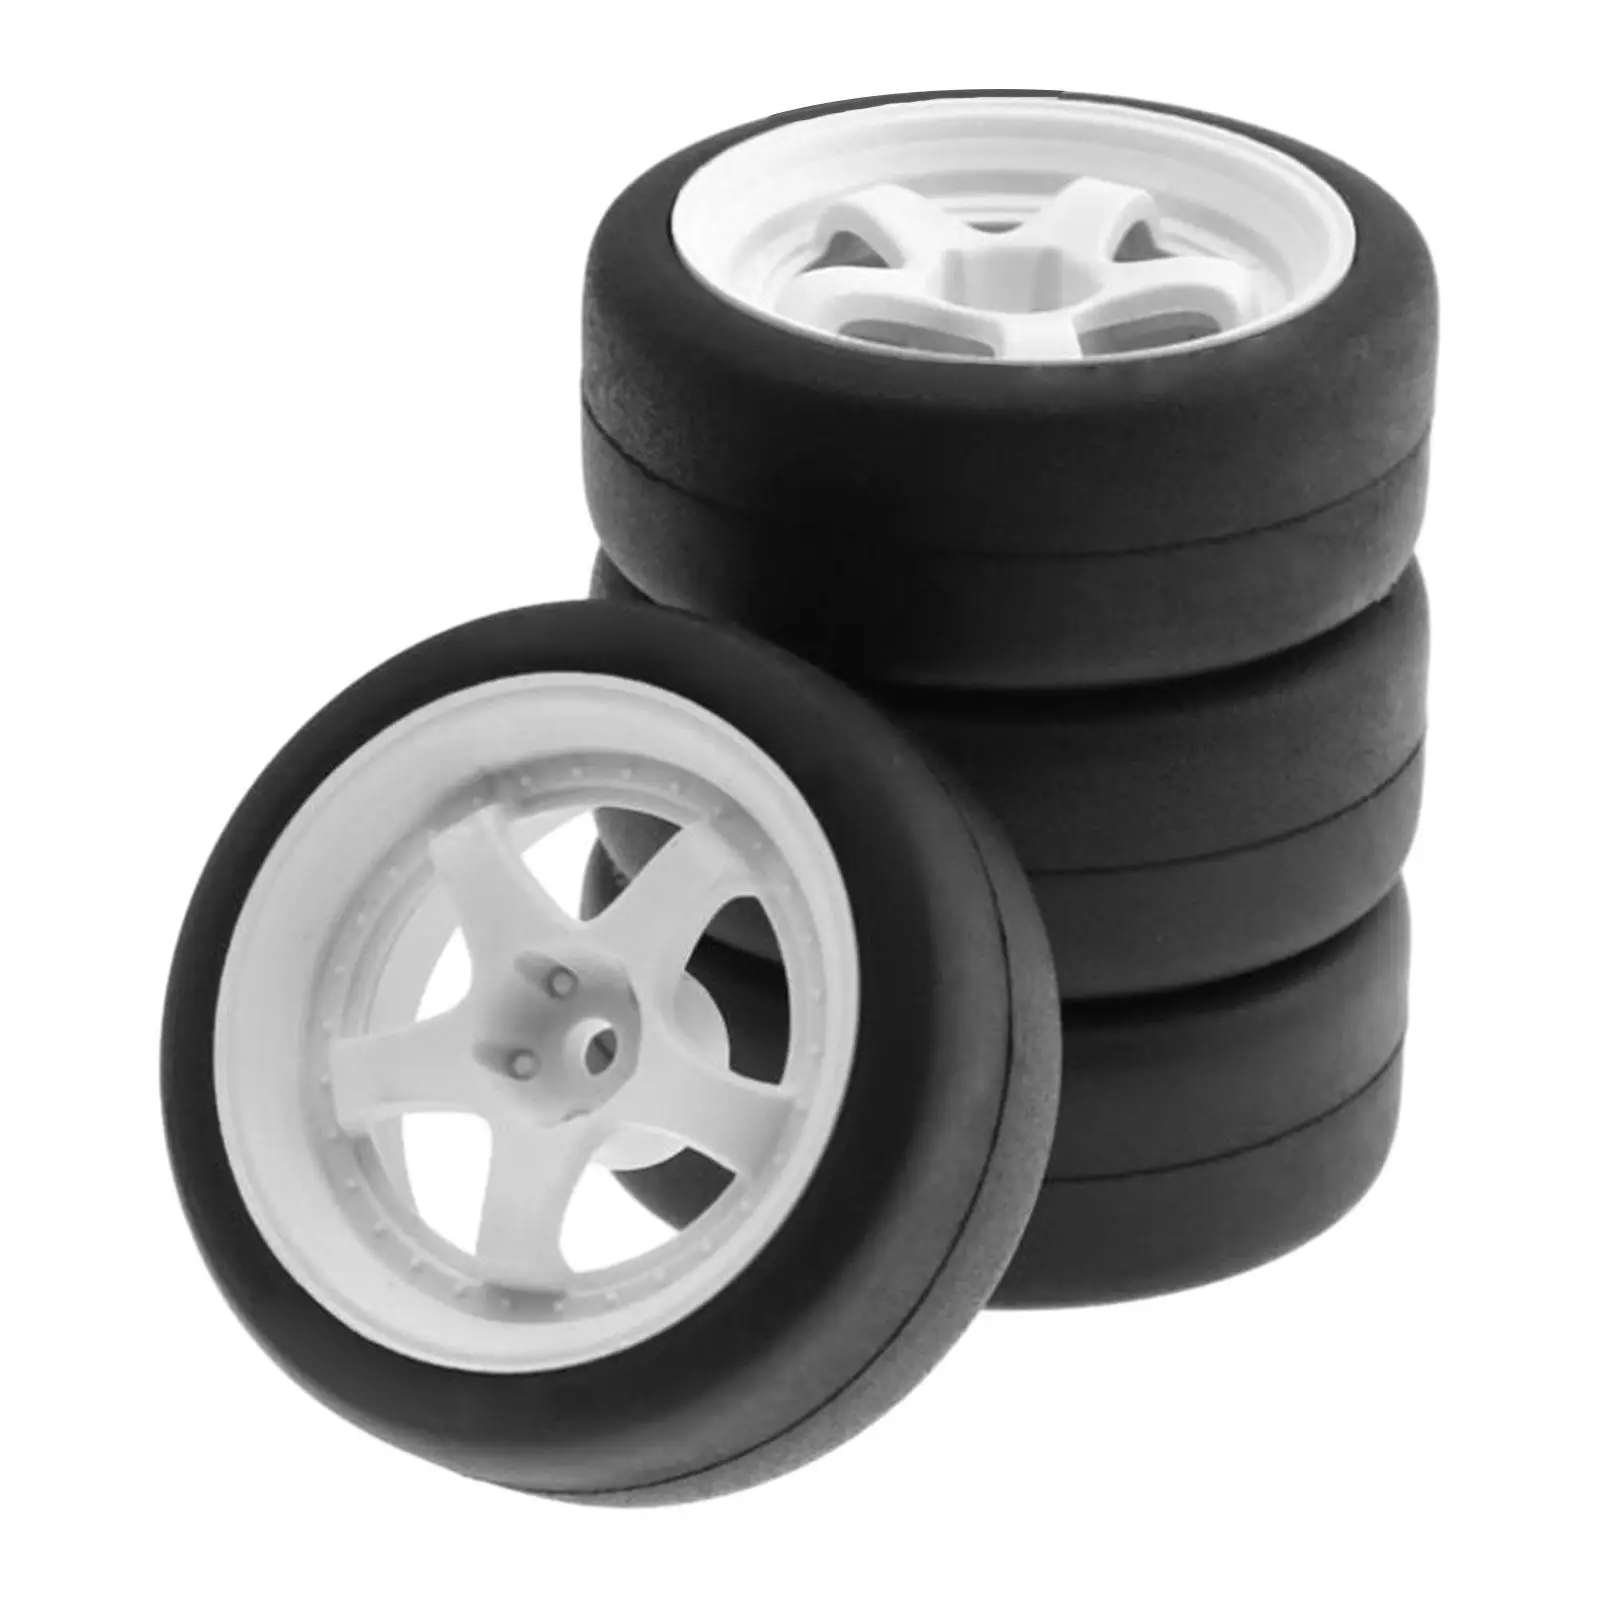 4Pcs Racing Car Tires Parts Replacement Replacements 1/10 Accessories RC Vehicle Upgrade Parts Spare Parts Hex 12mm RC Car Tires